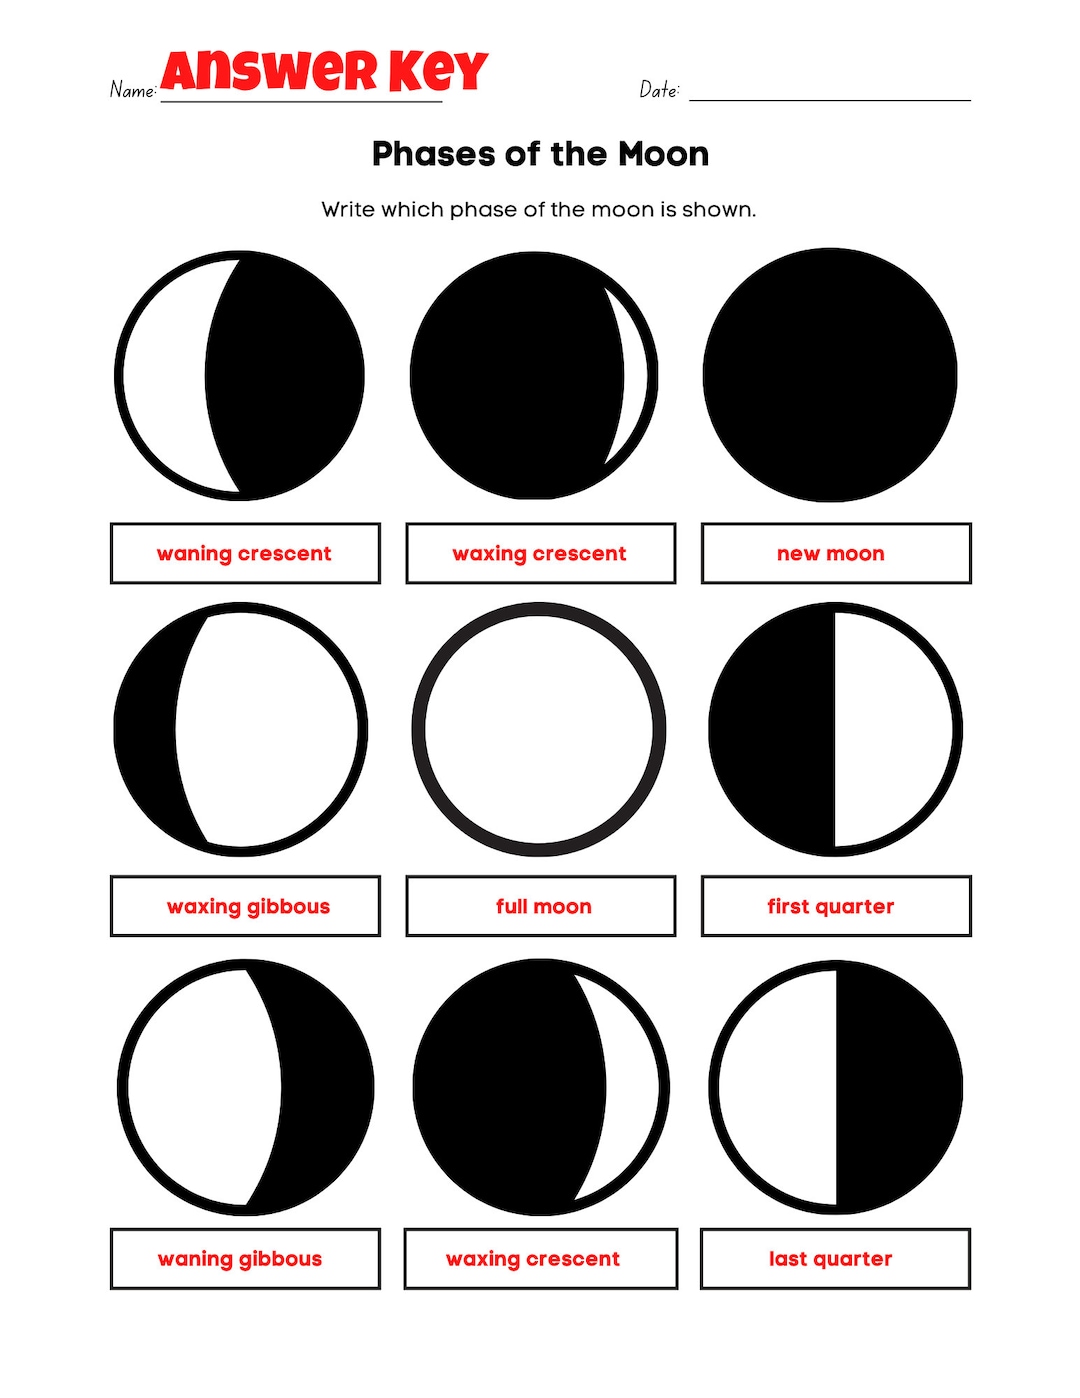 easy-phases-of-the-moon-worksheet-fun-pdf-print-activity-etsy